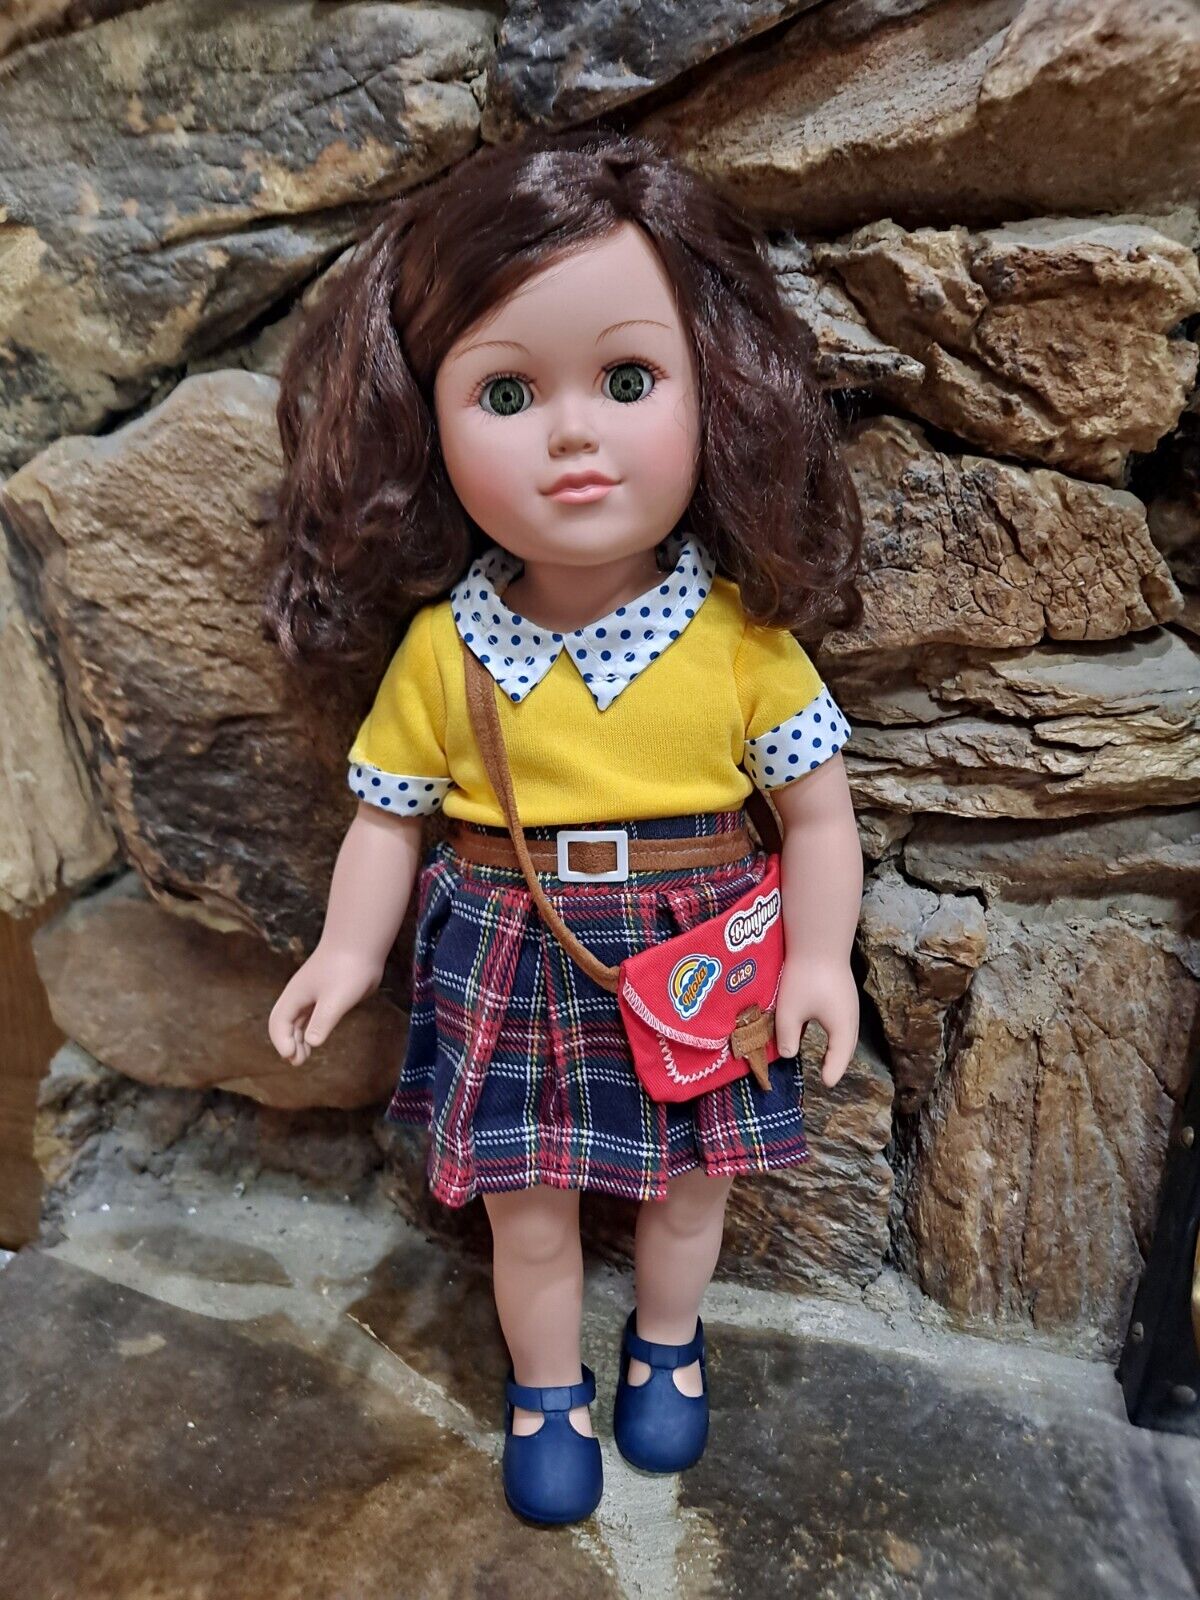 2013 CITITOY - BROWN HAIR GREEN EYES PLAID SKIRT YELLOW SWEATER 18"  GIRL DOLL